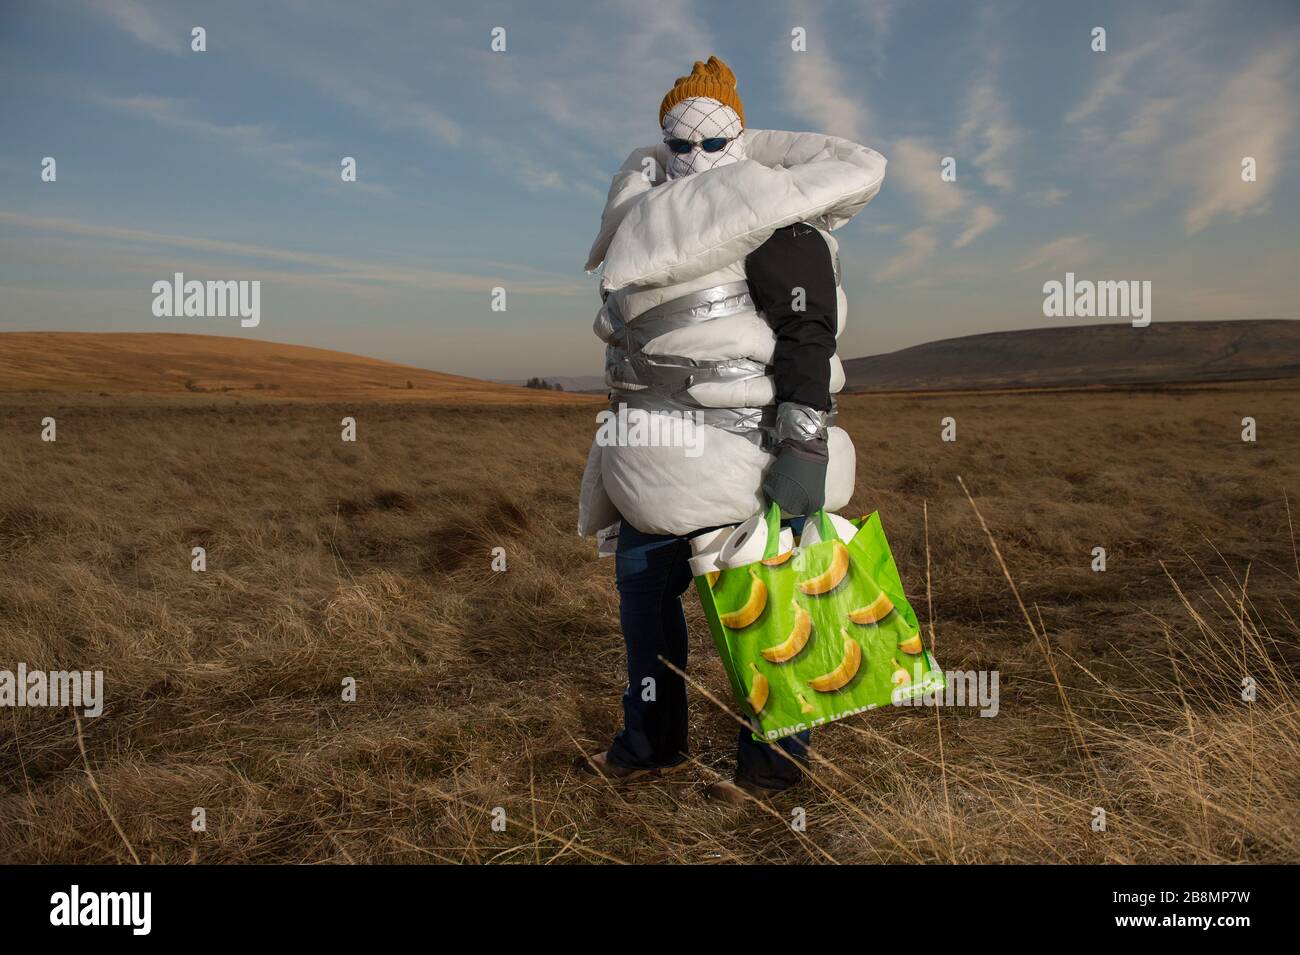 Perthshire Hills, UK. 22nd Mar, 2020. Pictured: Concept picture of a person going to extreme lengths to self isolate in the middle of nowhere carrying the most sought after item in the world of toilet paper, whilst wrapped up in home made personal protective equipment. Credit: Colin Fisher/Alamy Live News Stock Photo